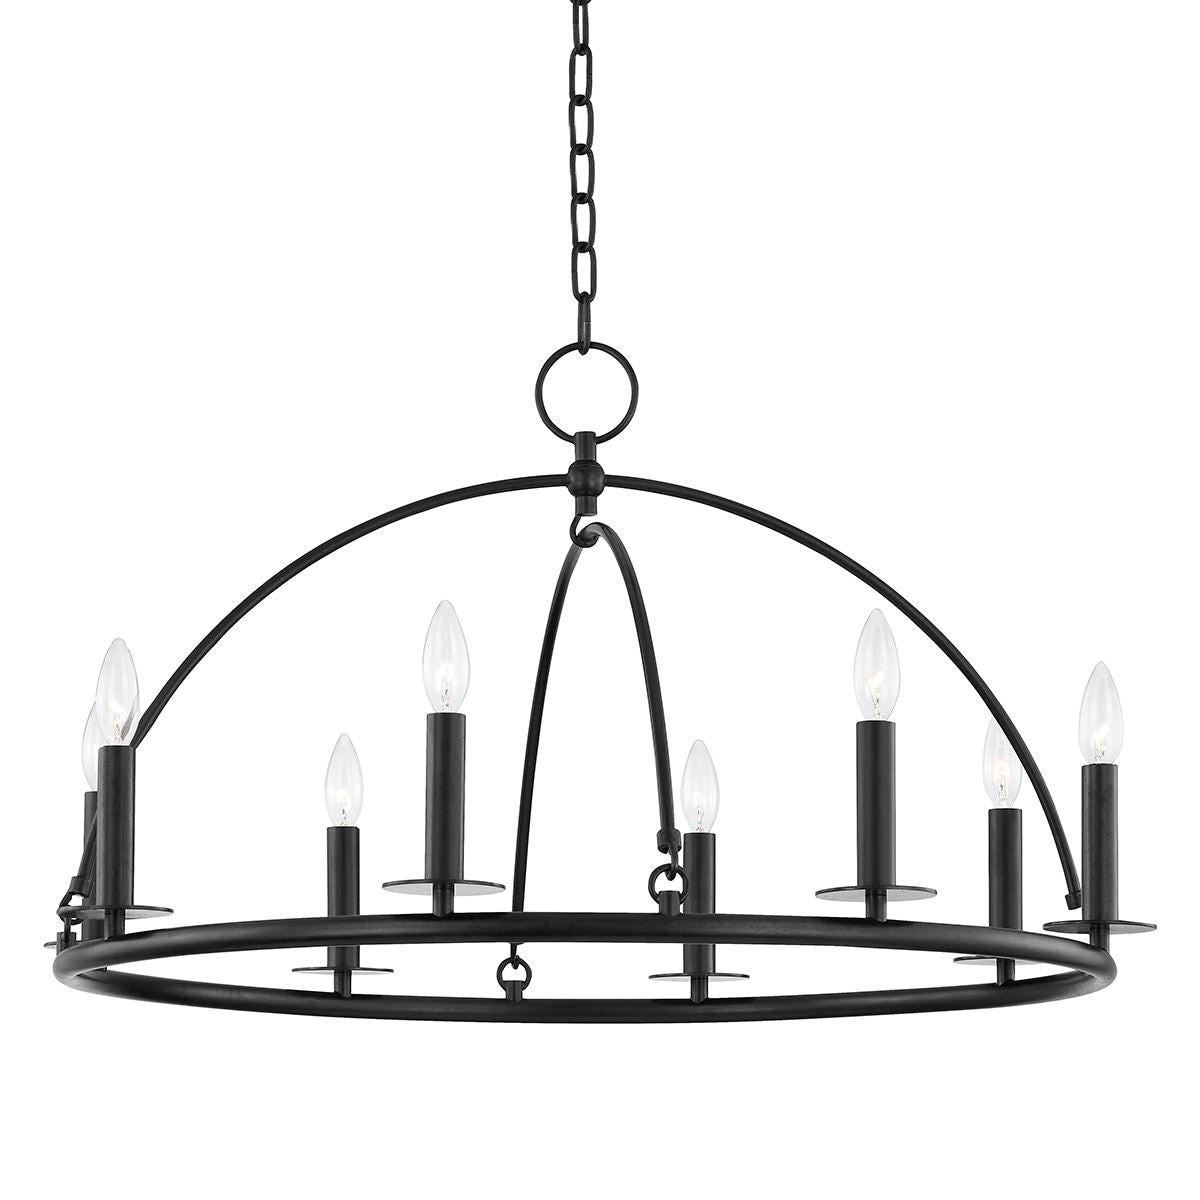 Rowan Chandelier Aged Iron. Front view.